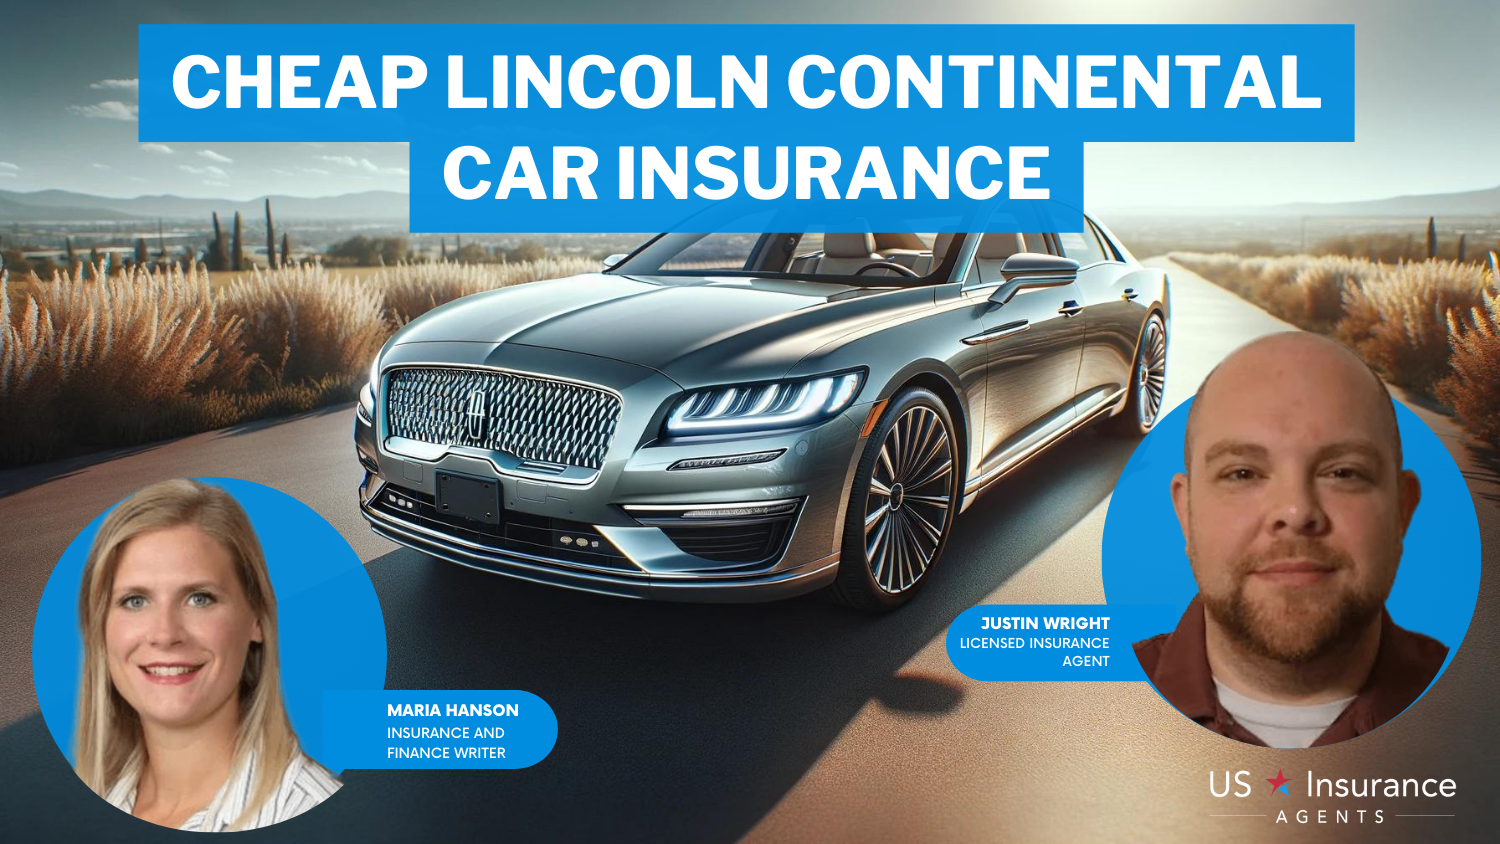 Cheap Lincoln Continental Car Insurance: The General, Auto-Owners, and American Family